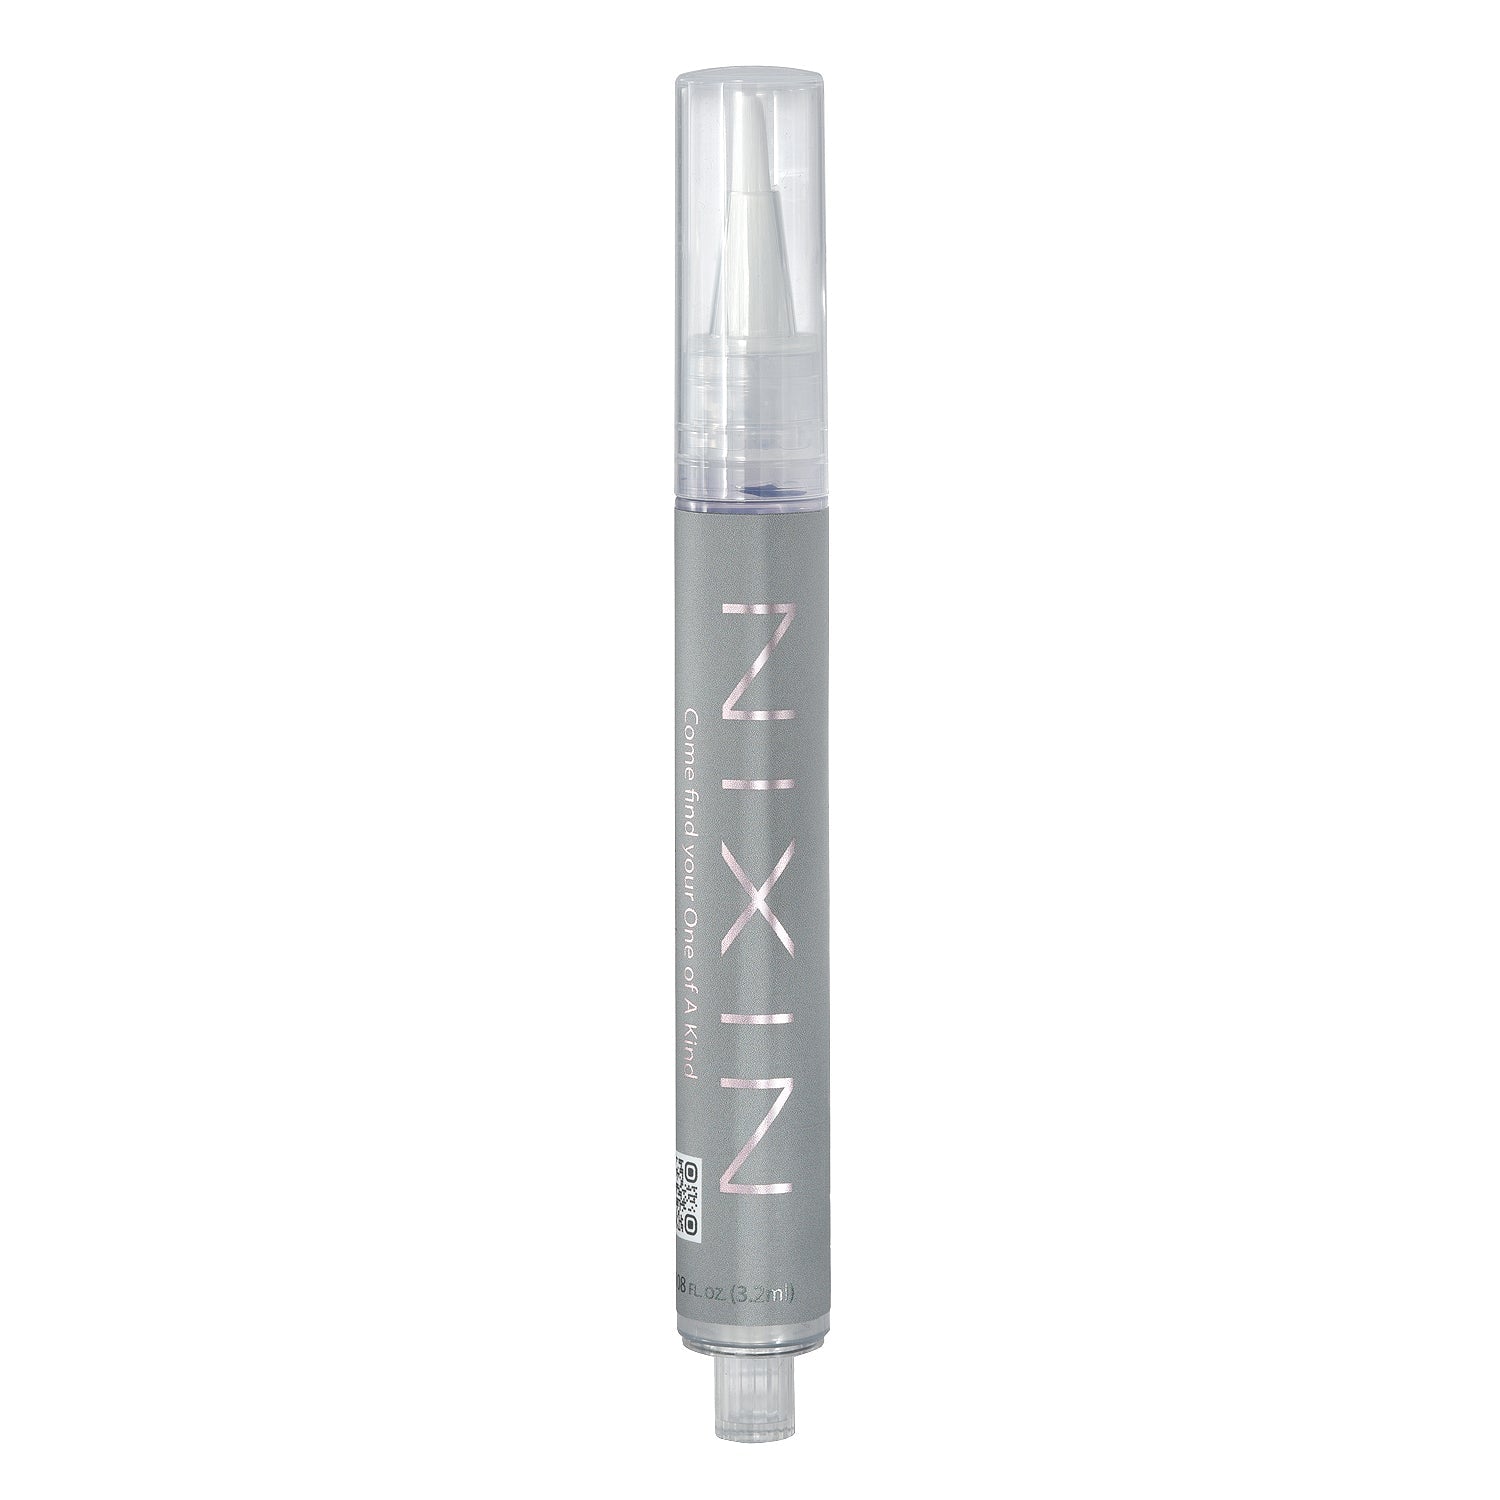 NIXIN Jewelry Cleaner in the form of a Jewelry Cleaning Pen shown against a white background. Allows for jewelry cleaning at home or on the go.